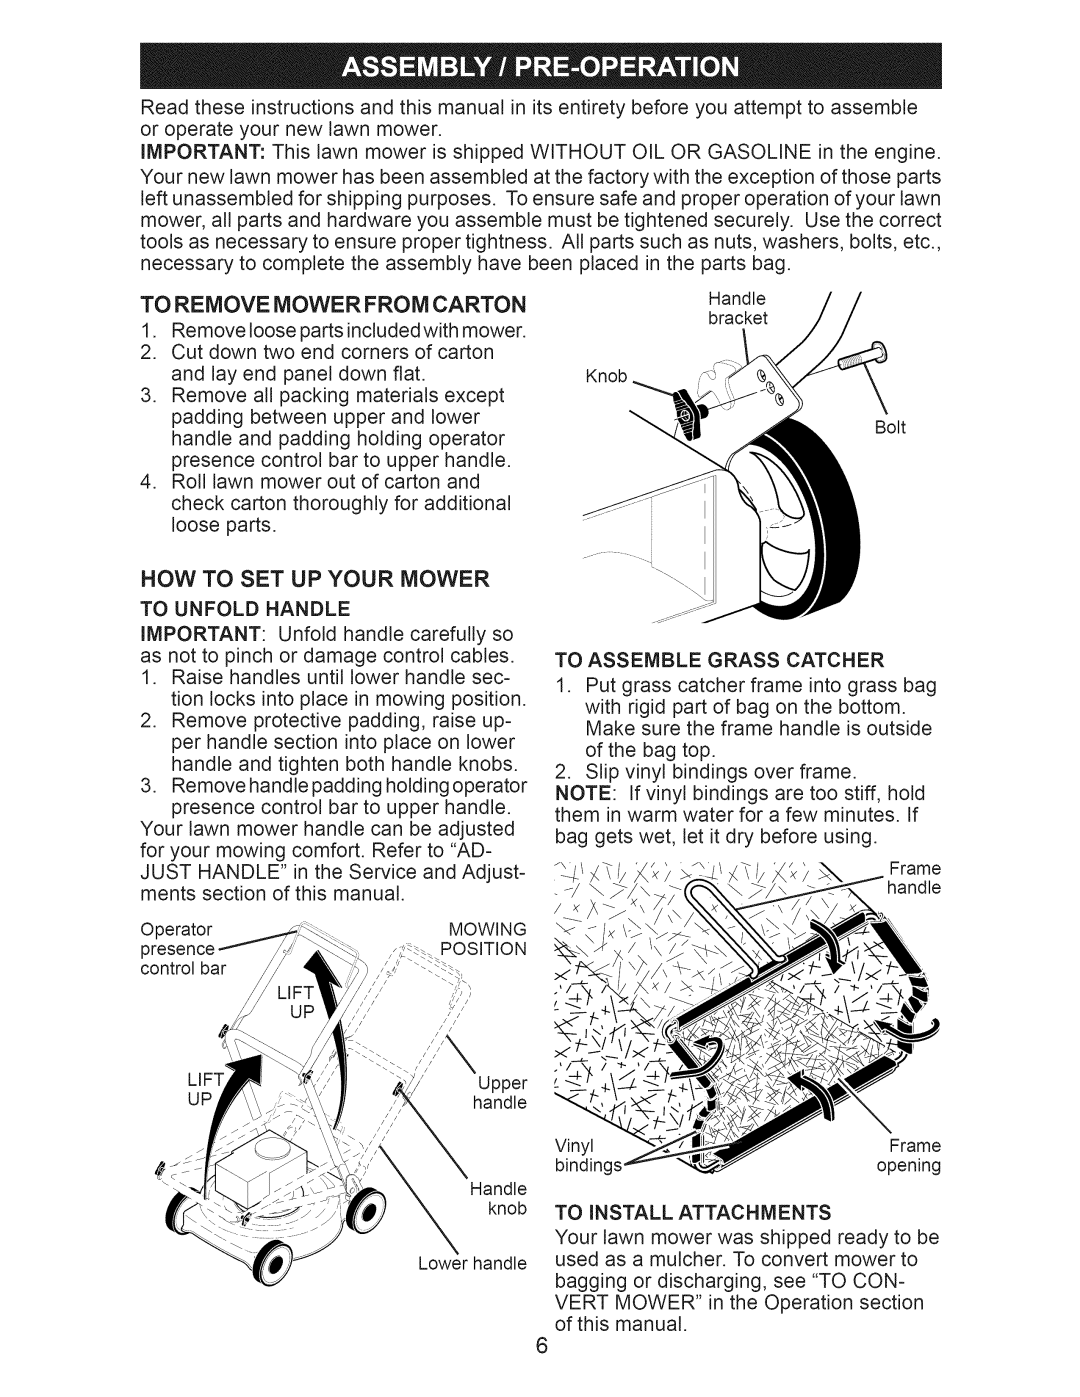 Craftsman 917.376401 owner manual To Remove Mower From Carton, Now To Set Up Your Mower 